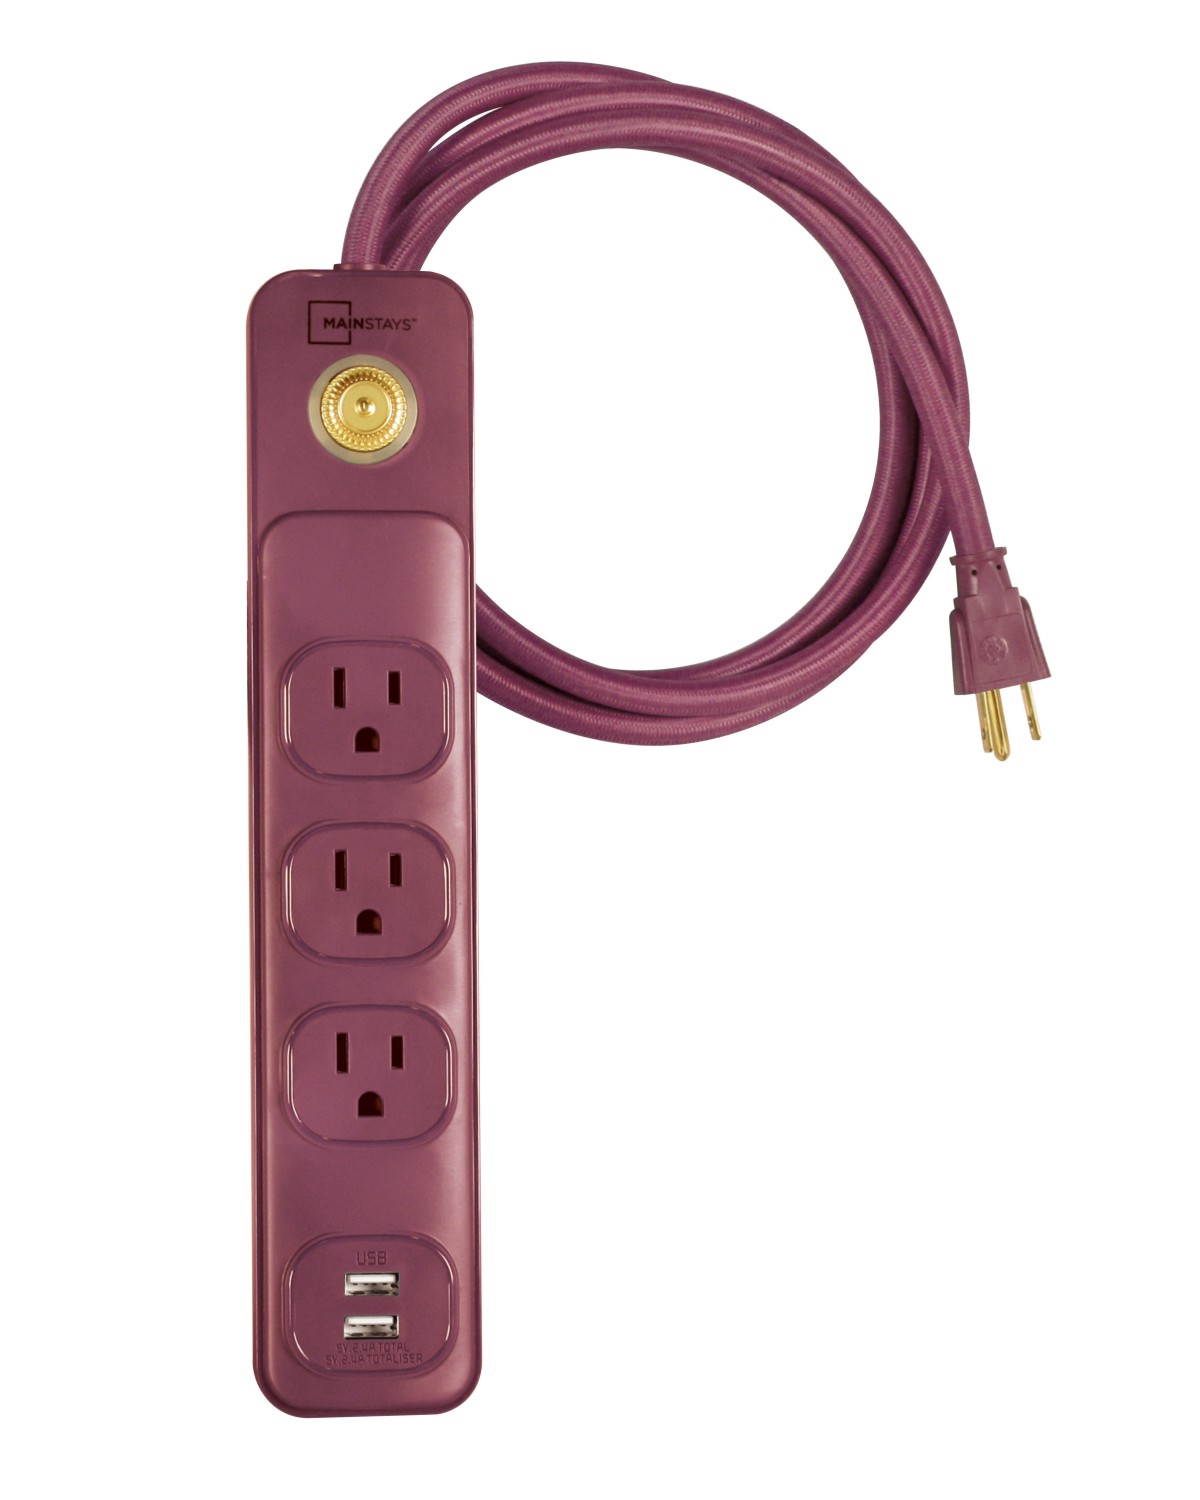 6' 14/3 Mainstays 3-Outlet Power Strip w/ 2 USB Ports (Red Burgundy) $4.89 + Free Shipping w/ Walmart+ or on $35+